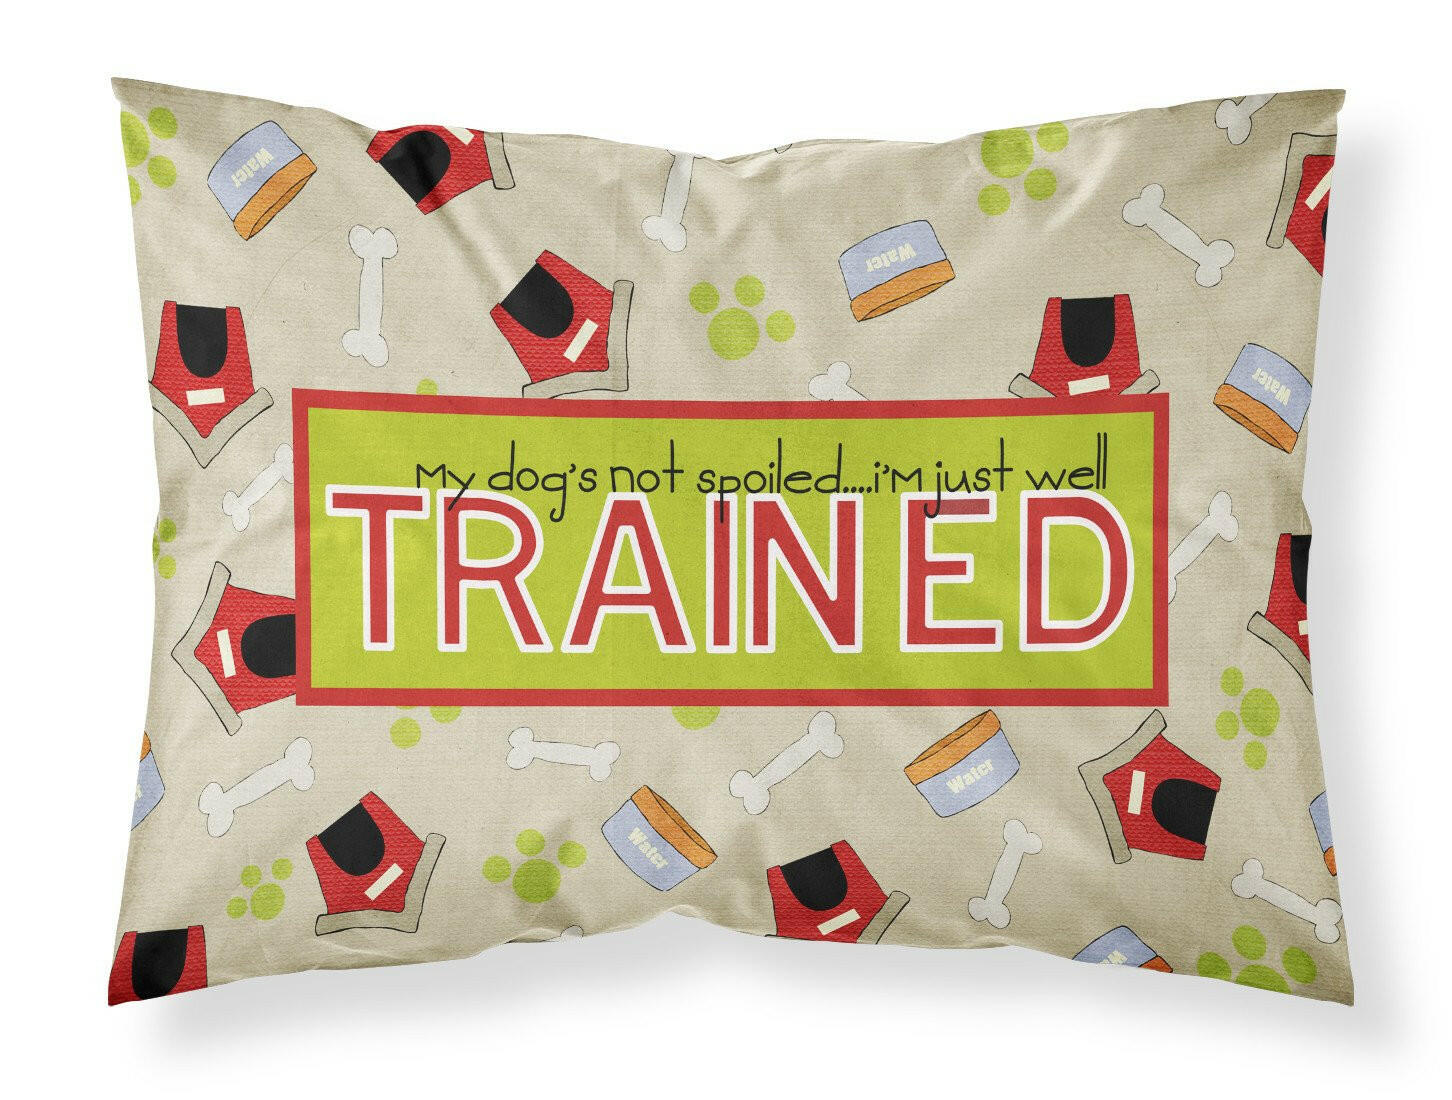 My Dog's not spoiled I'm just well trained Moisture wicking Fabric standard pillowcase SB3051PILLOWCASE by Caroline's Treasures